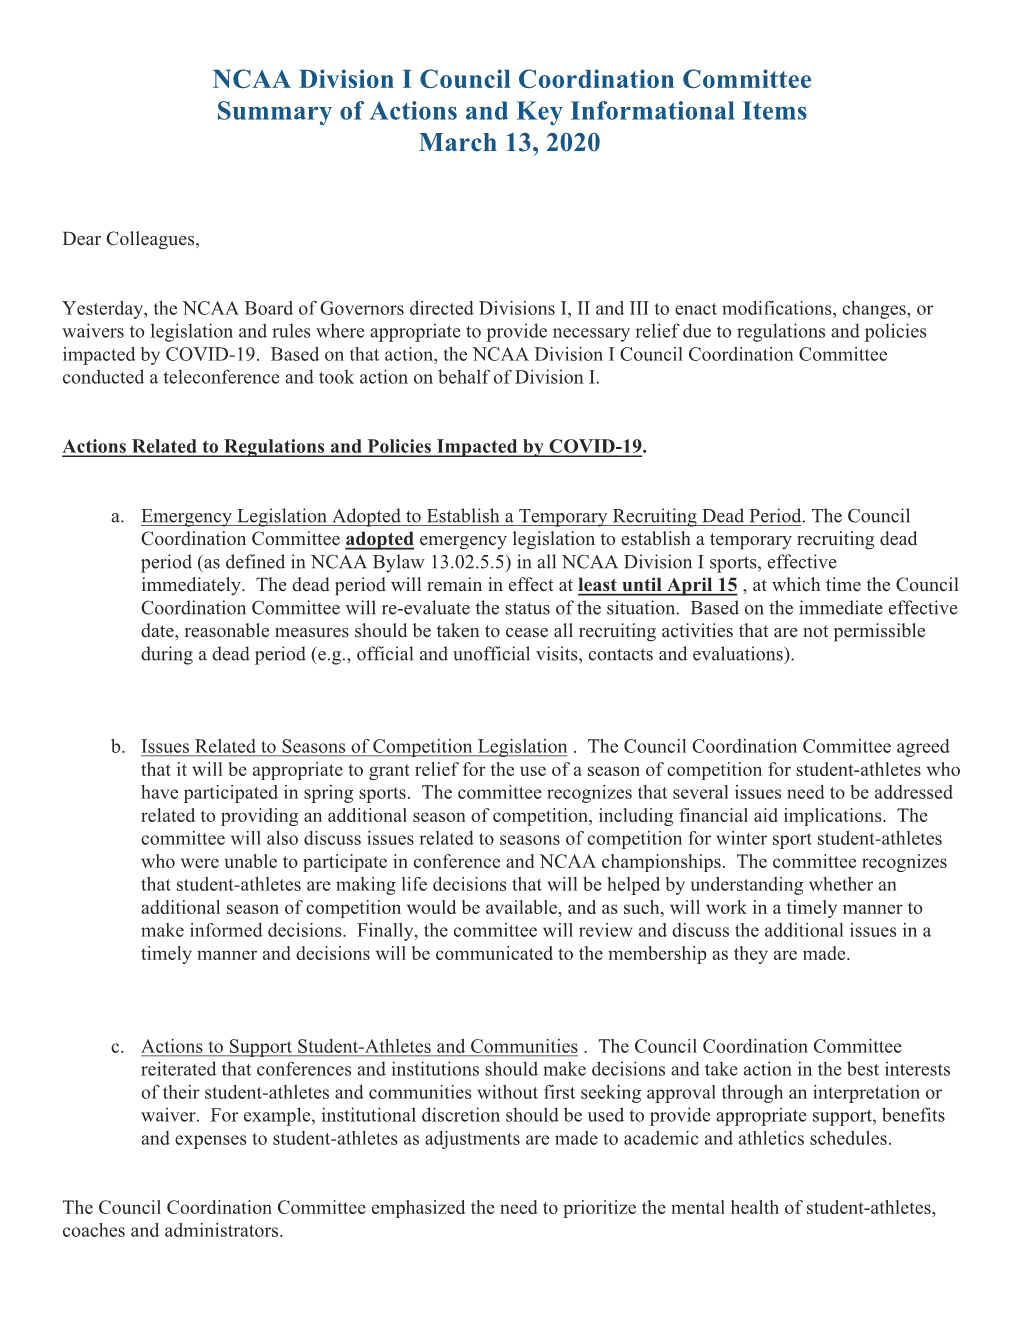 NCAA Division I Council Coordination Committee Summary of Actions and Key Informational Items March 13, 2020